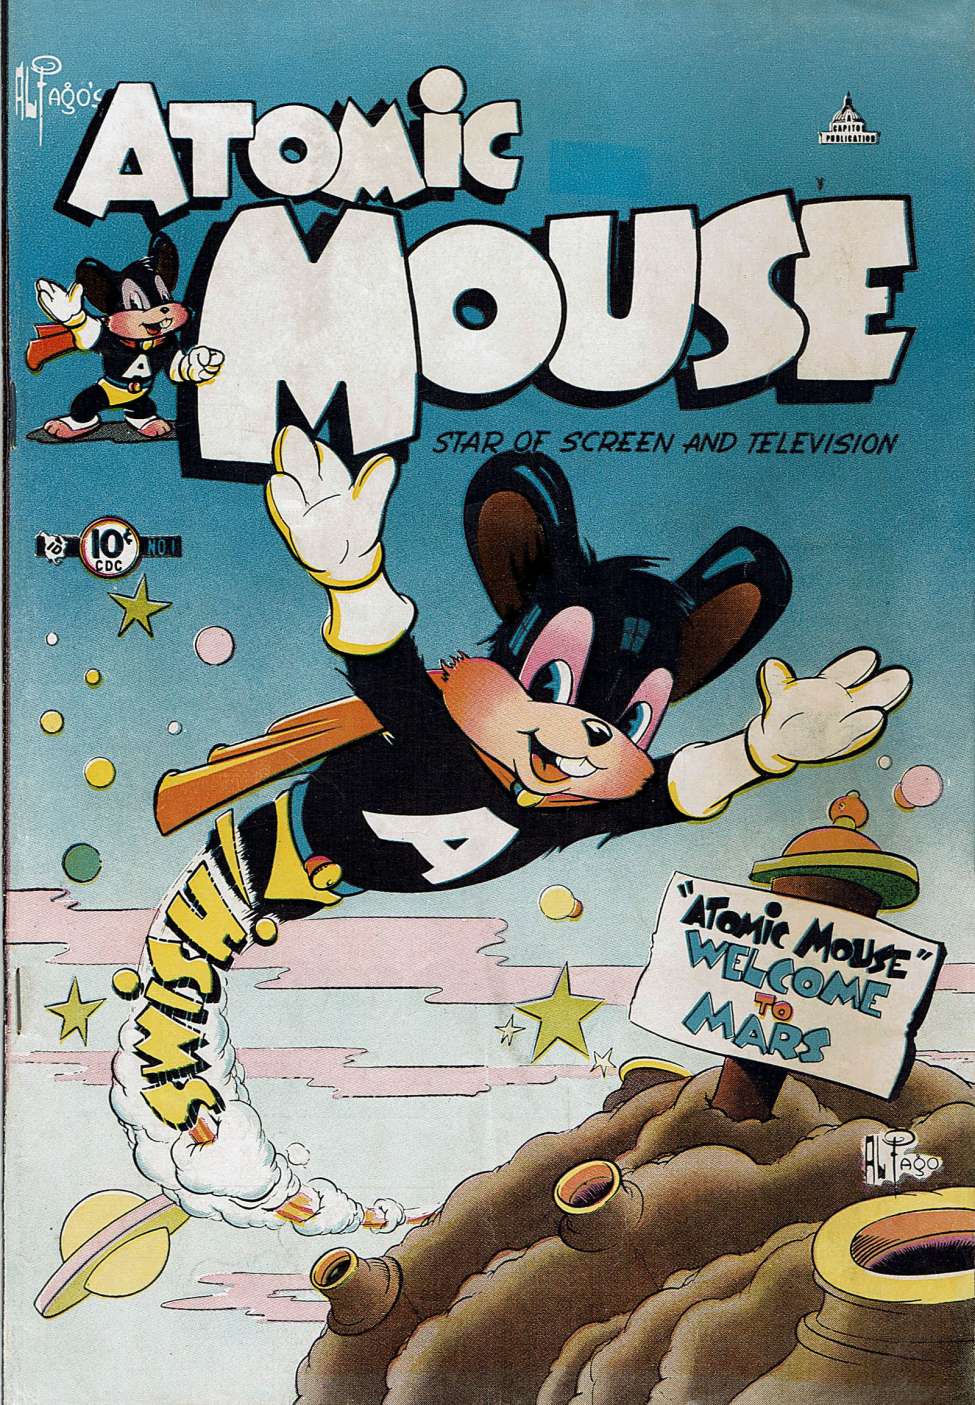 Book Cover For Atomic Mouse 1 - Version 2